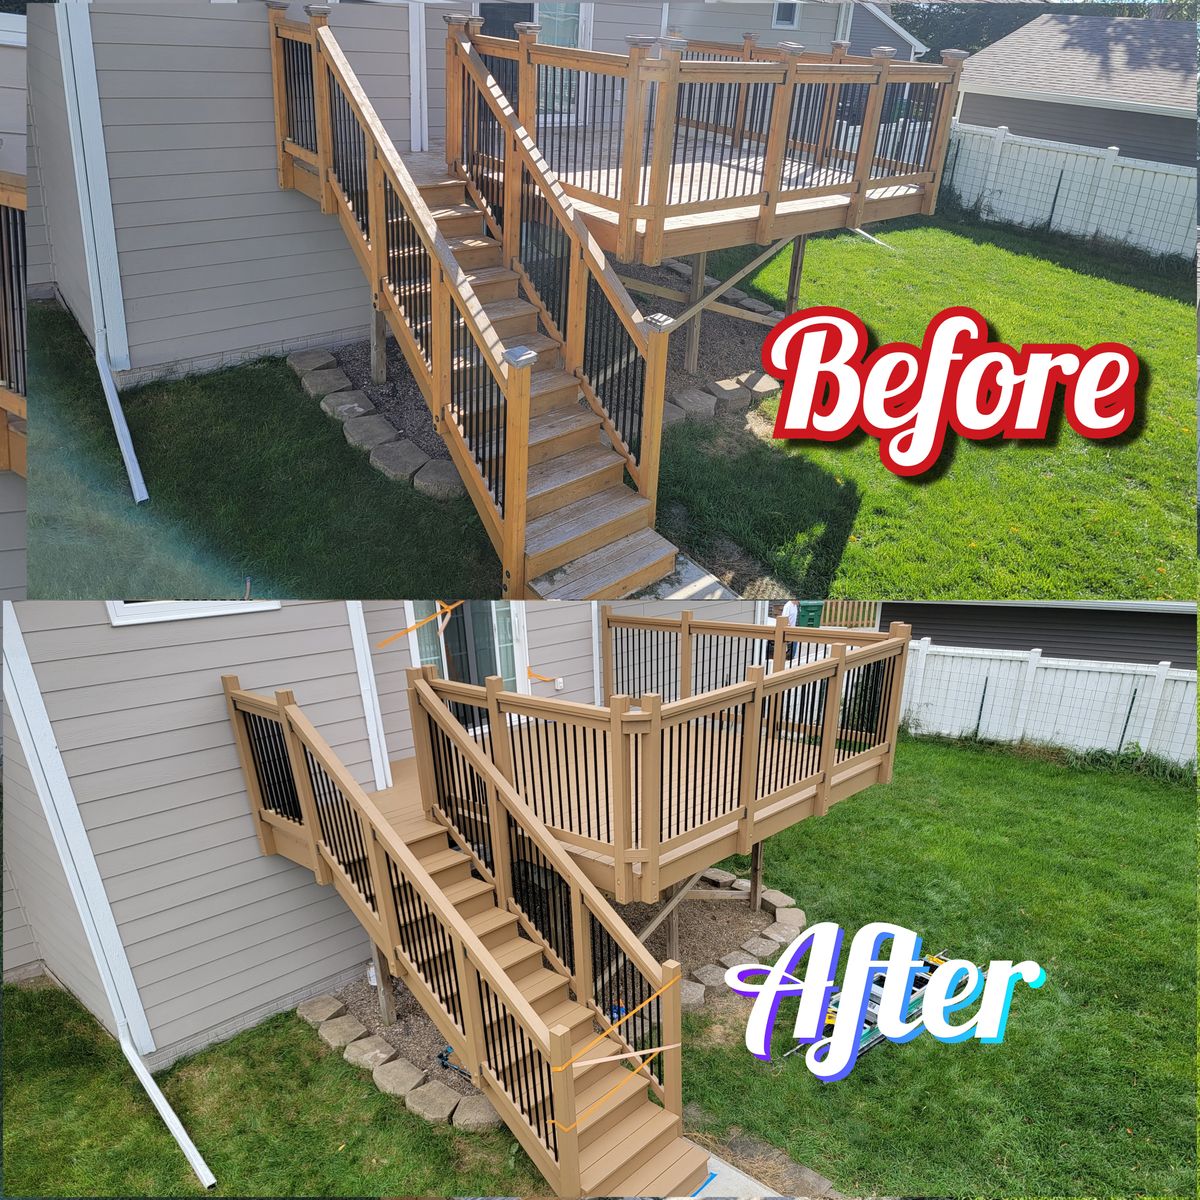 Staining for Budget Pro Painting & Remodeling LLC  in Des Moines, IA